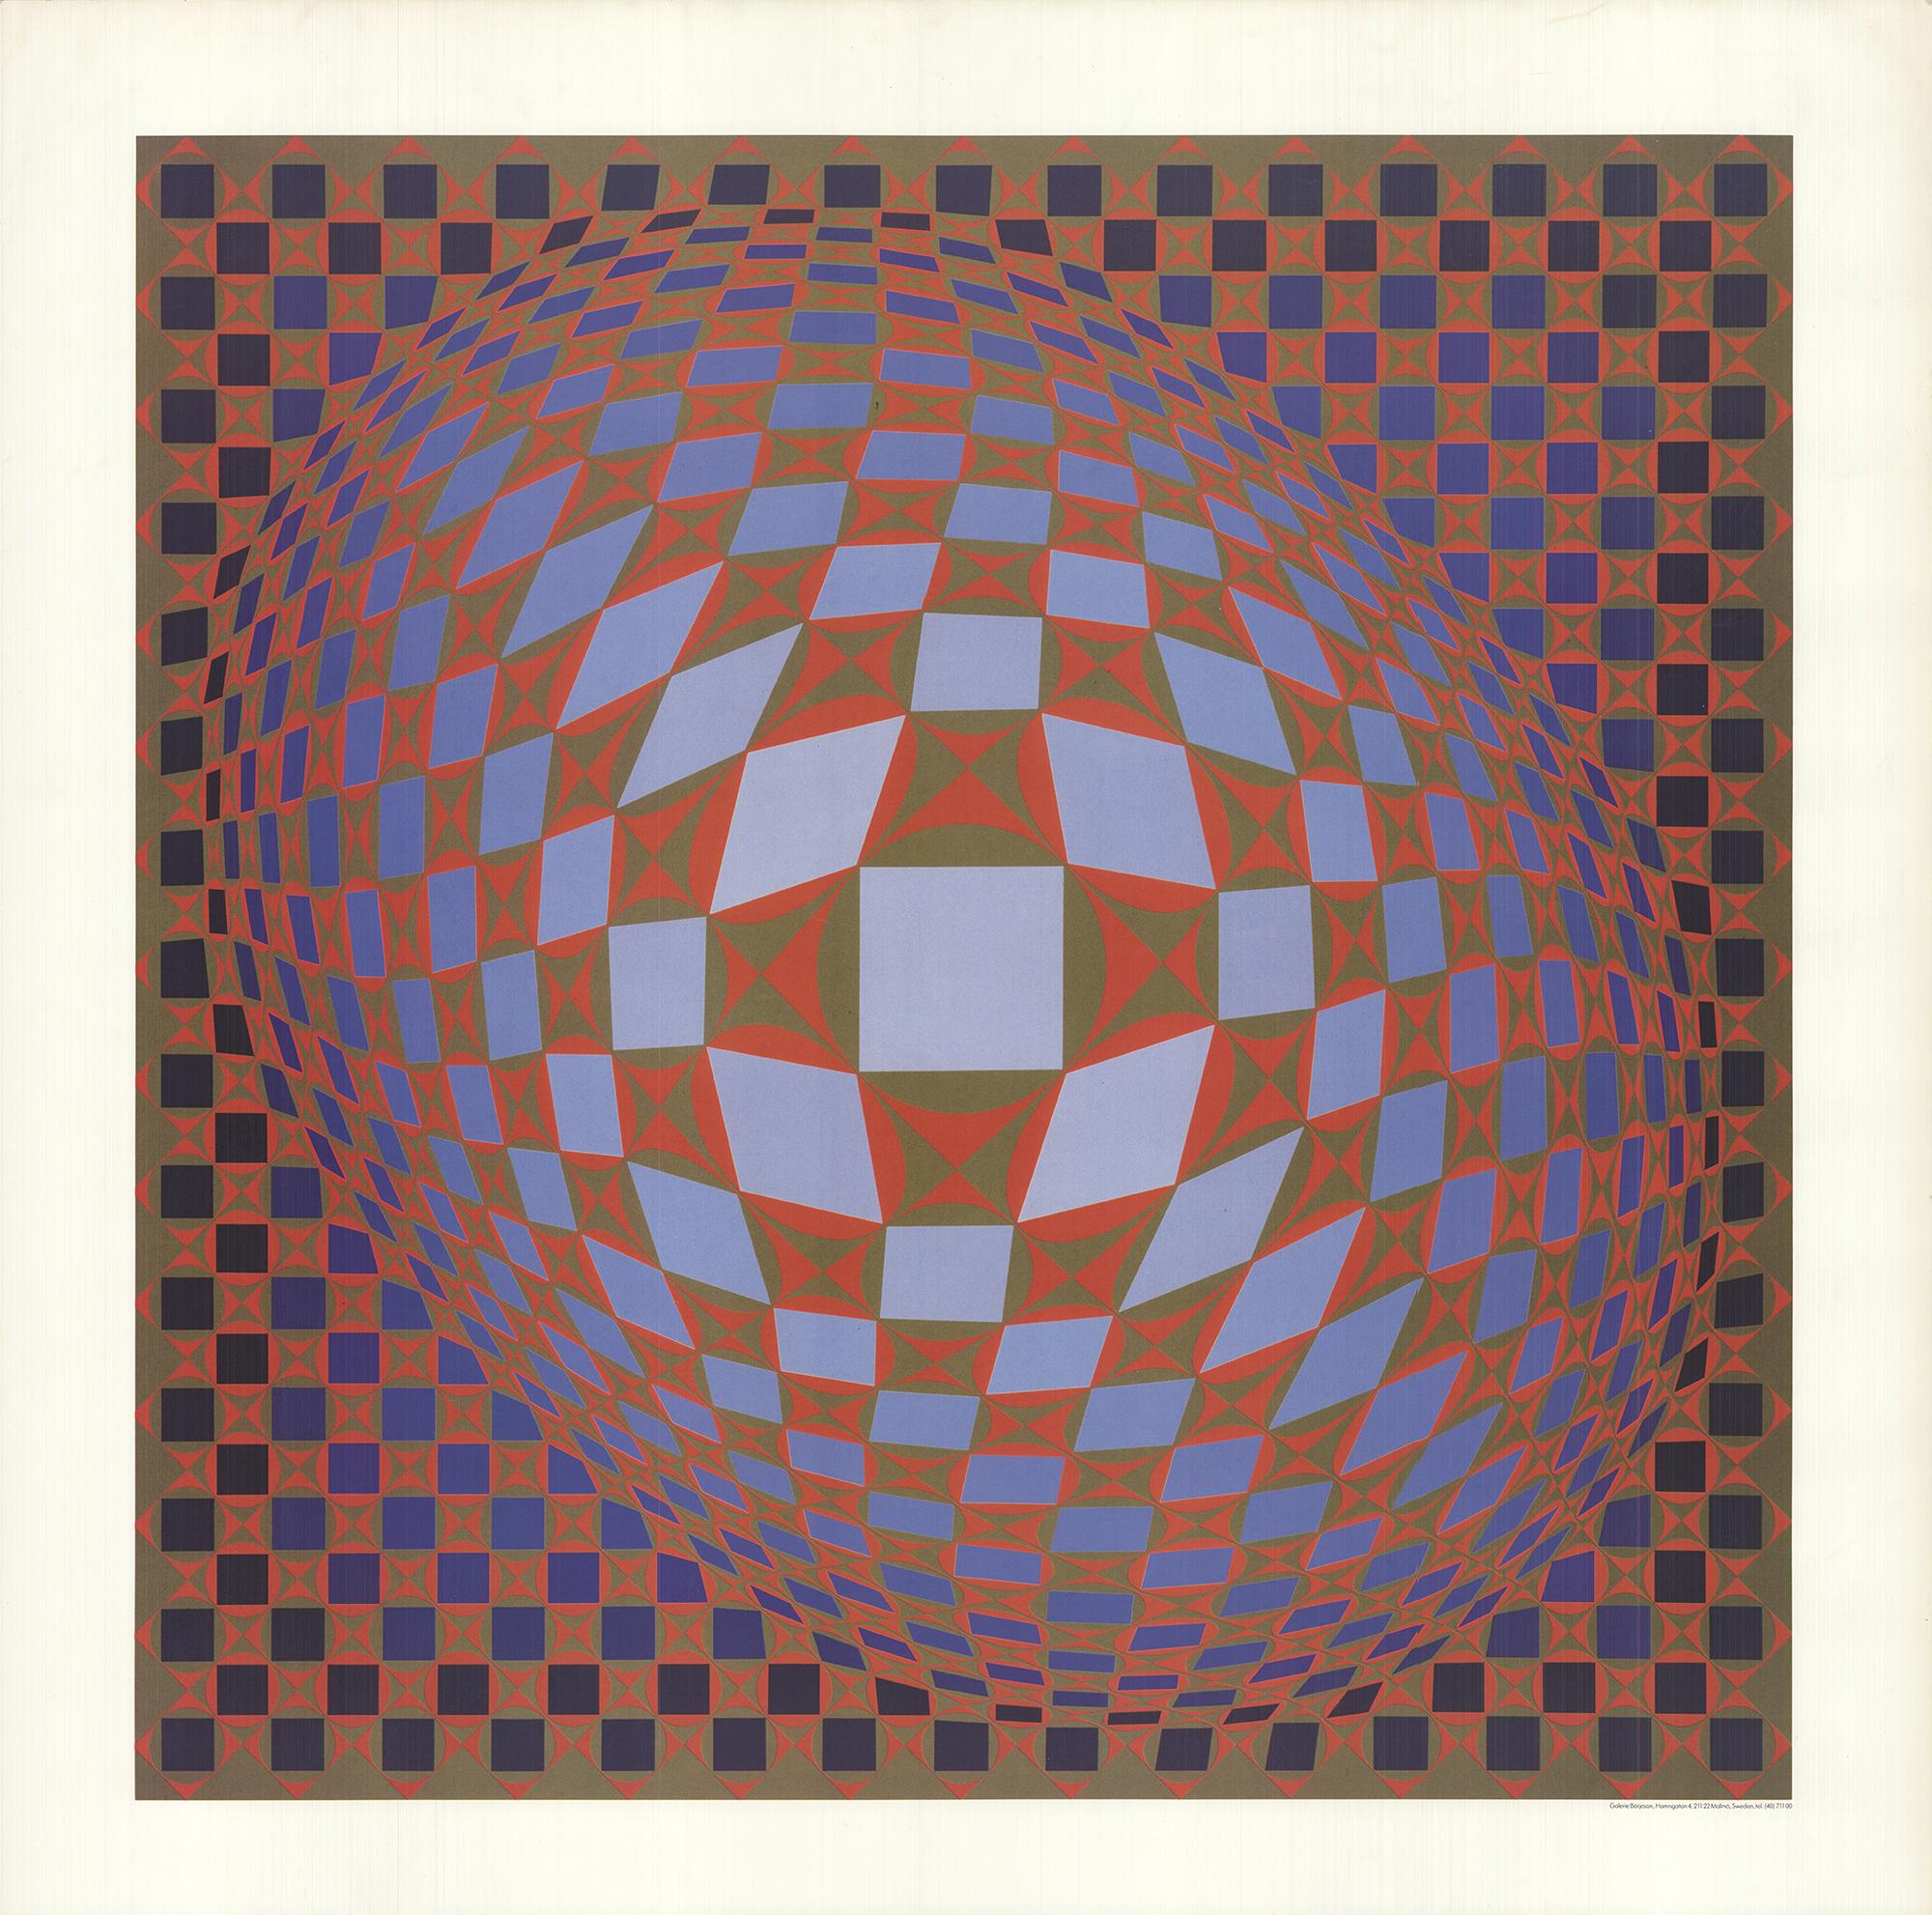 This geometric representation was produced by Victor Vasarely who is credited with having founded the "Op Art" movement of the 1930s and published by Borgeson Galerie for an exhibition.